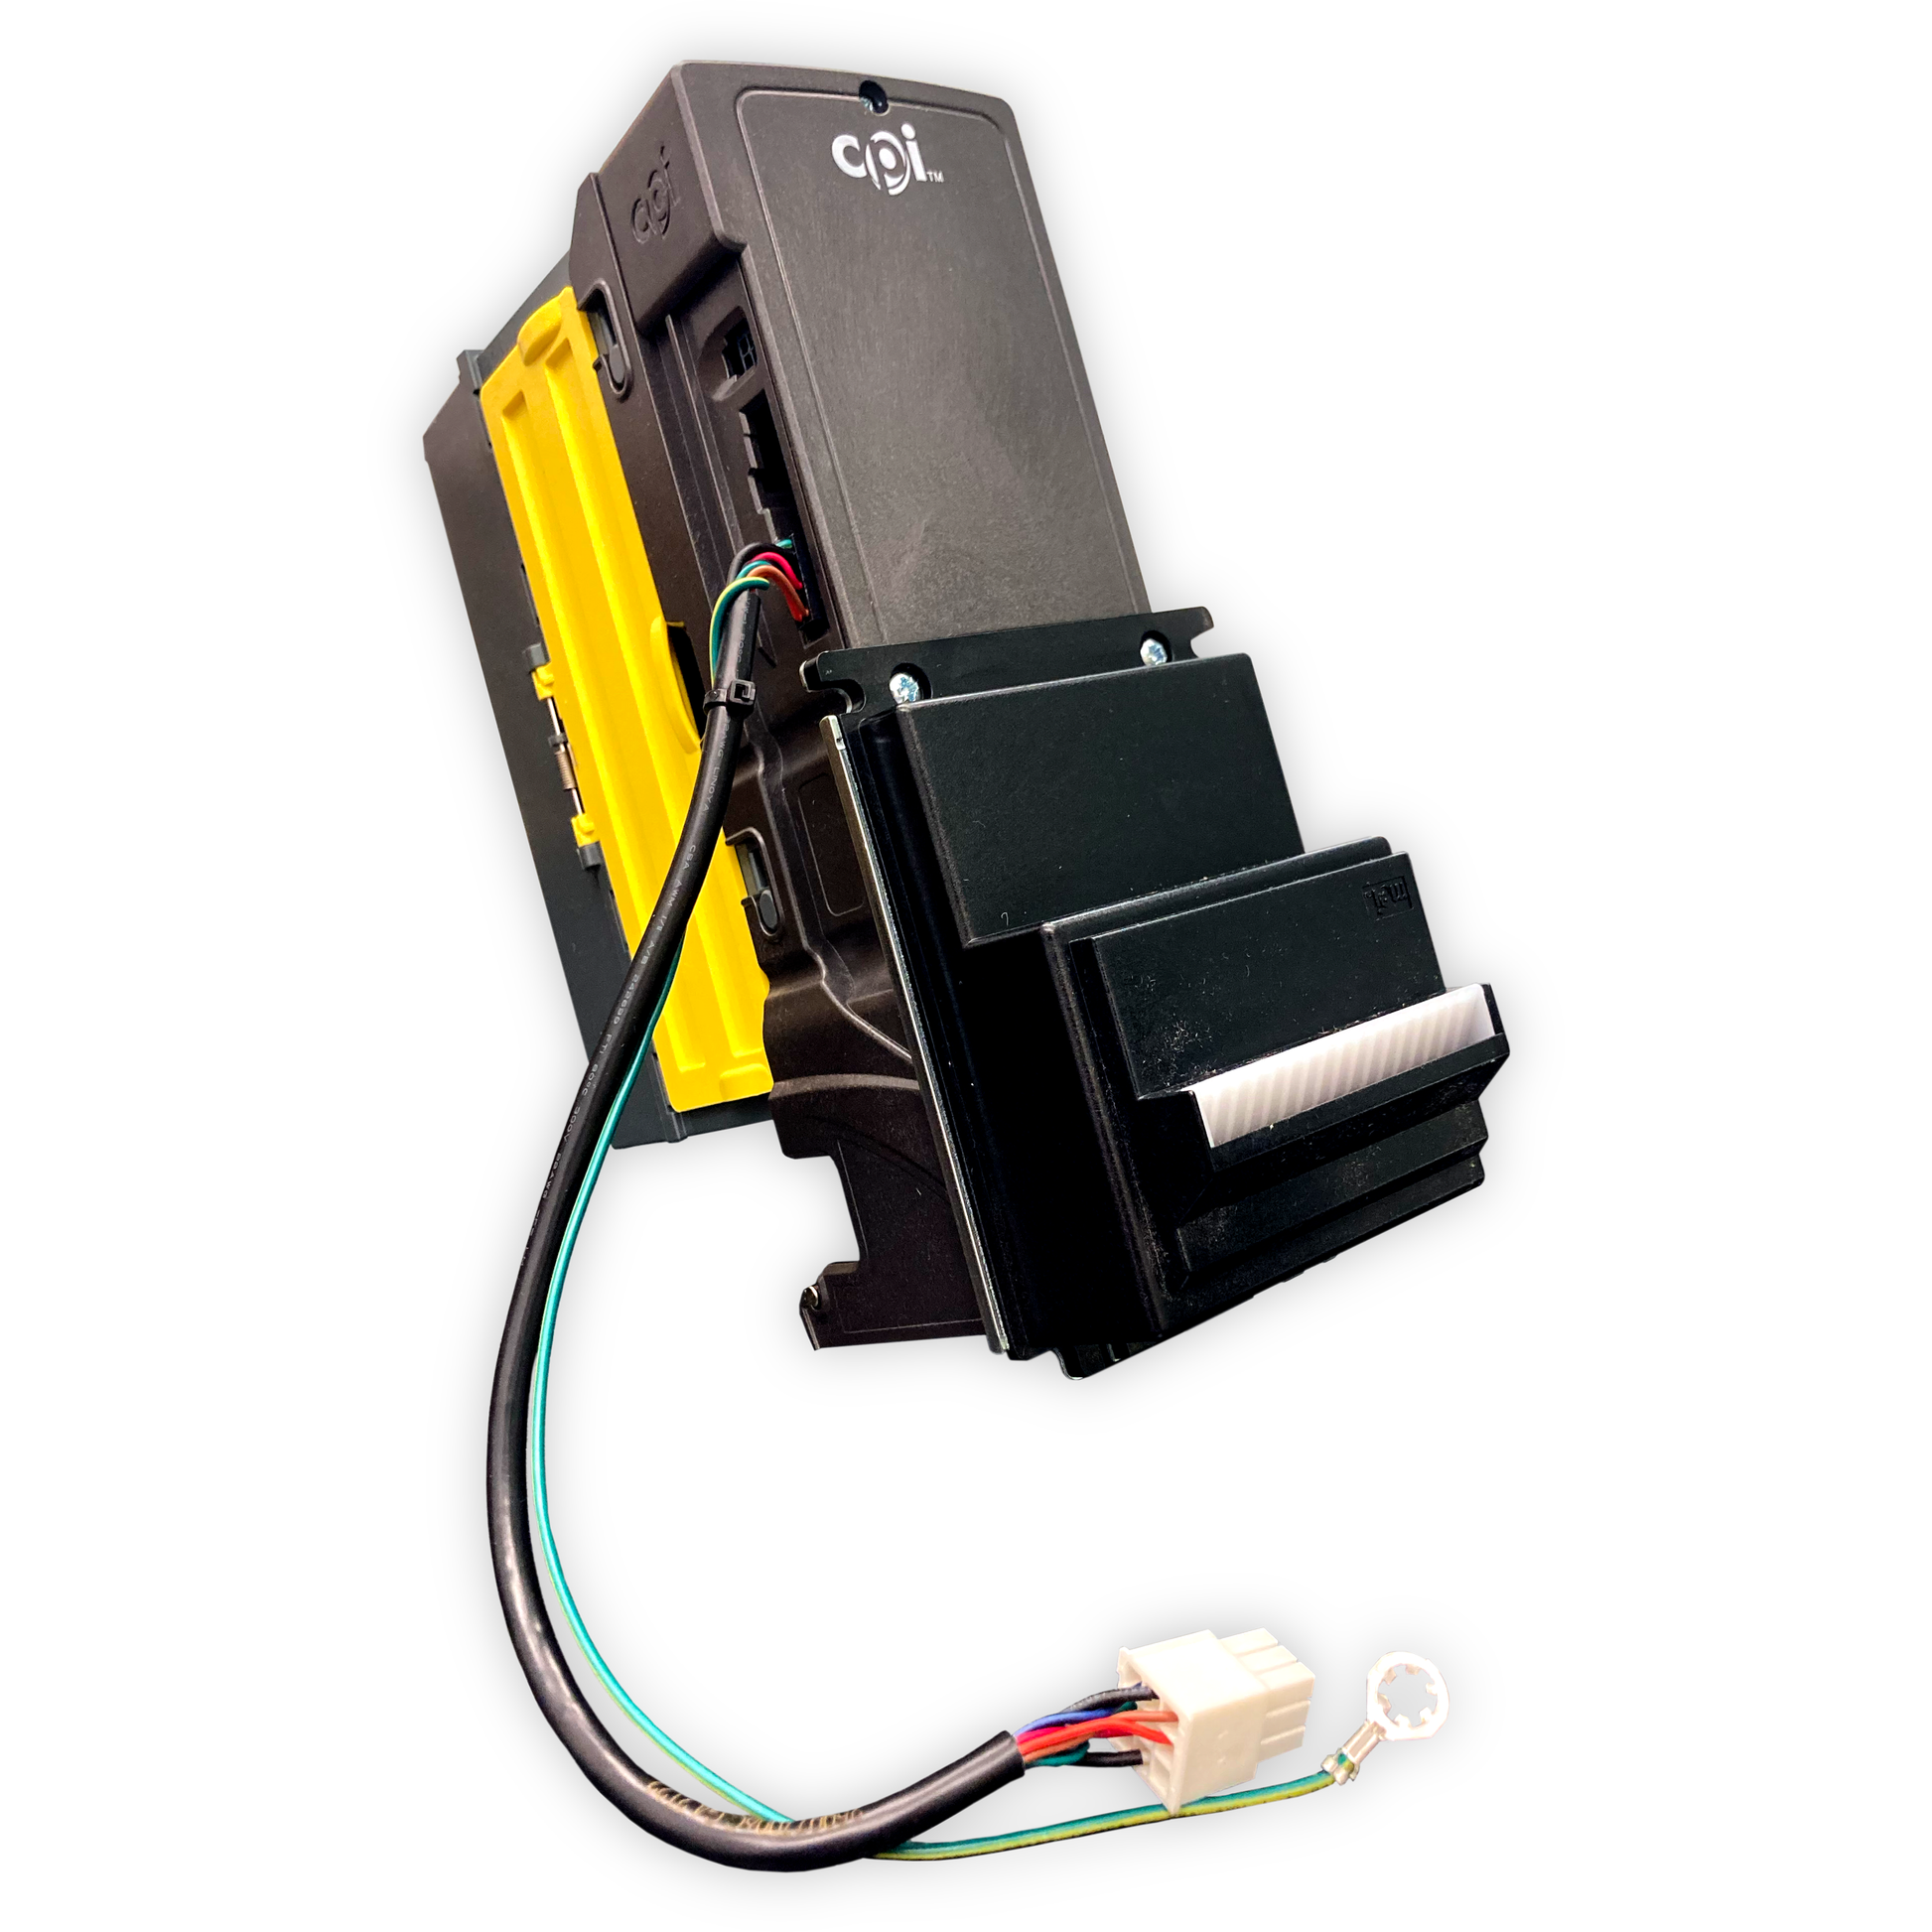 Sold by Miele Manufacturing (Miele MFG). CPI Bill Acceptor, New Bill Acceptor. Down Stacker Bill Acceptor. Pennsylvania Skill (PA Skill) is powered by Pace-O-Matic (POM) and built by Miele Manufacturing (Miele MFG).